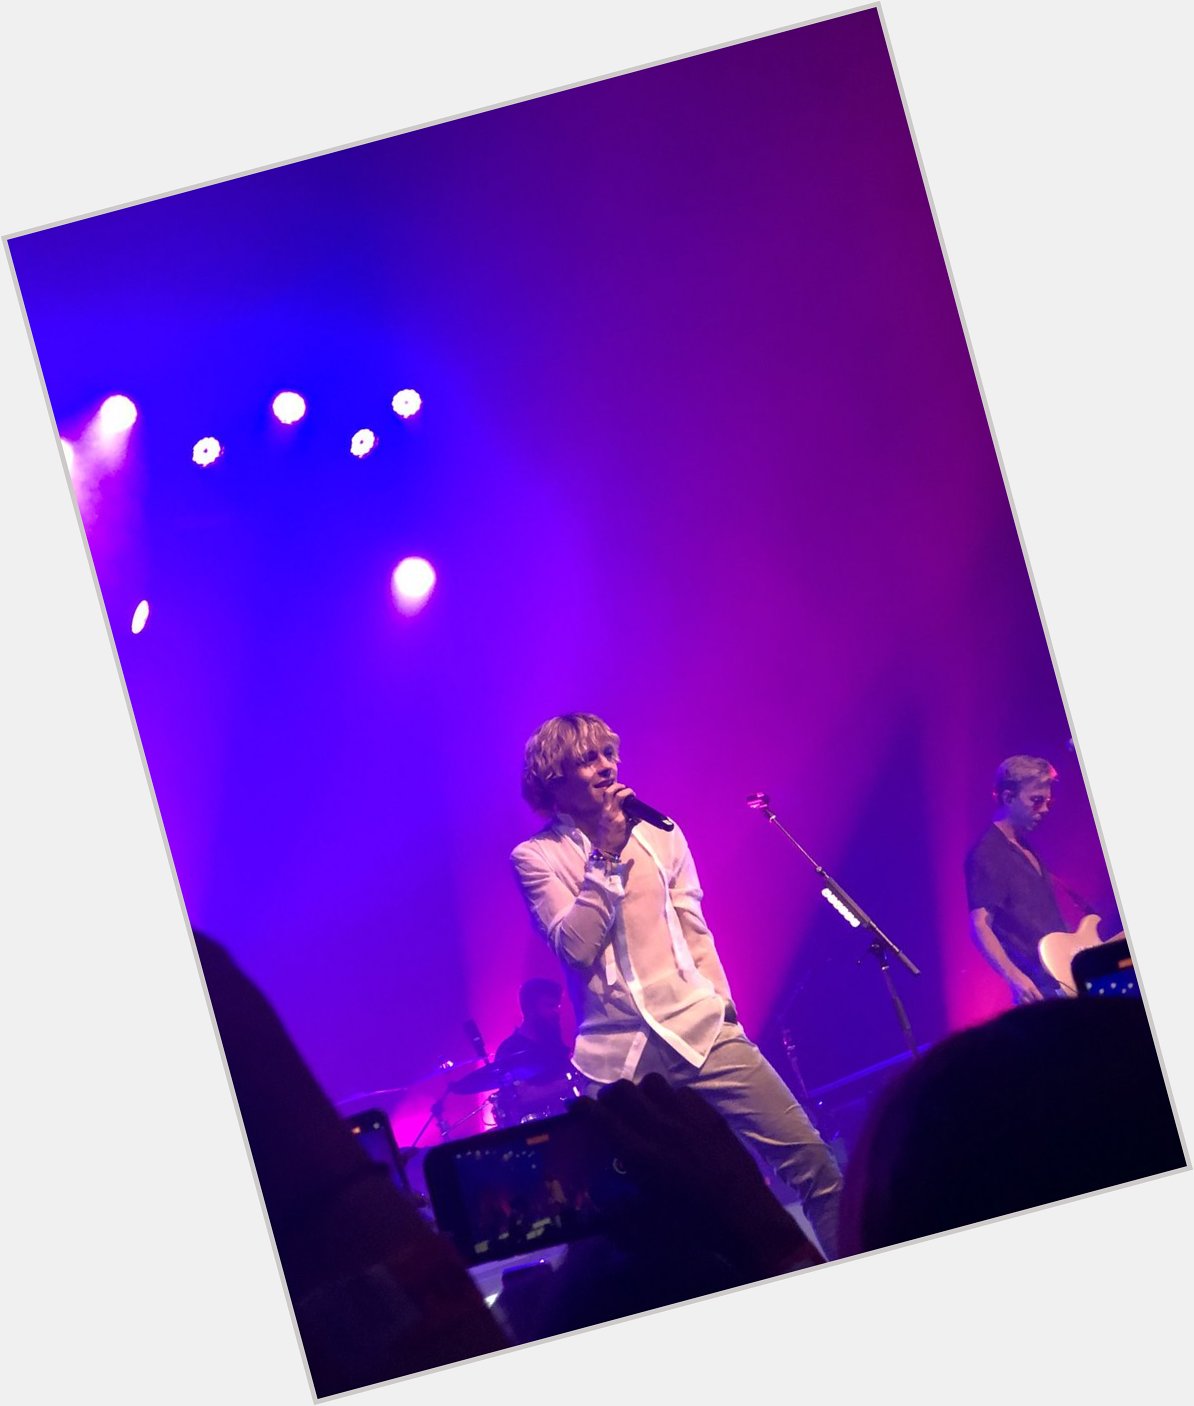 Happy birthday ross lynch thank you for one of the greatest nights of my life<3 